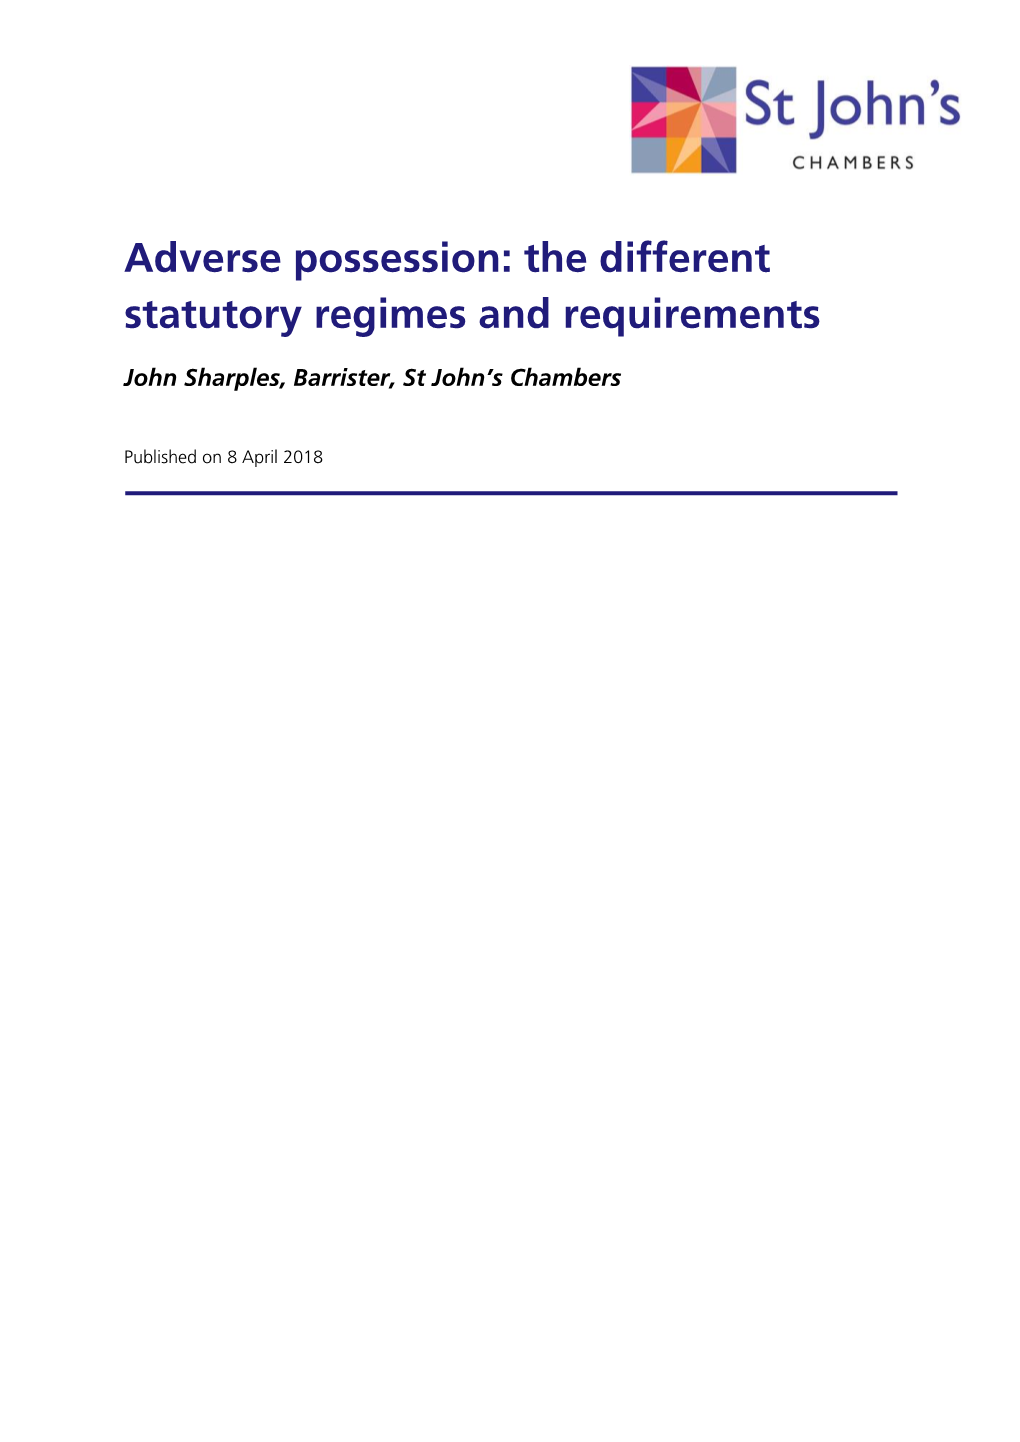 Adverse Possession: the Different Statutory Regimes and Requirements